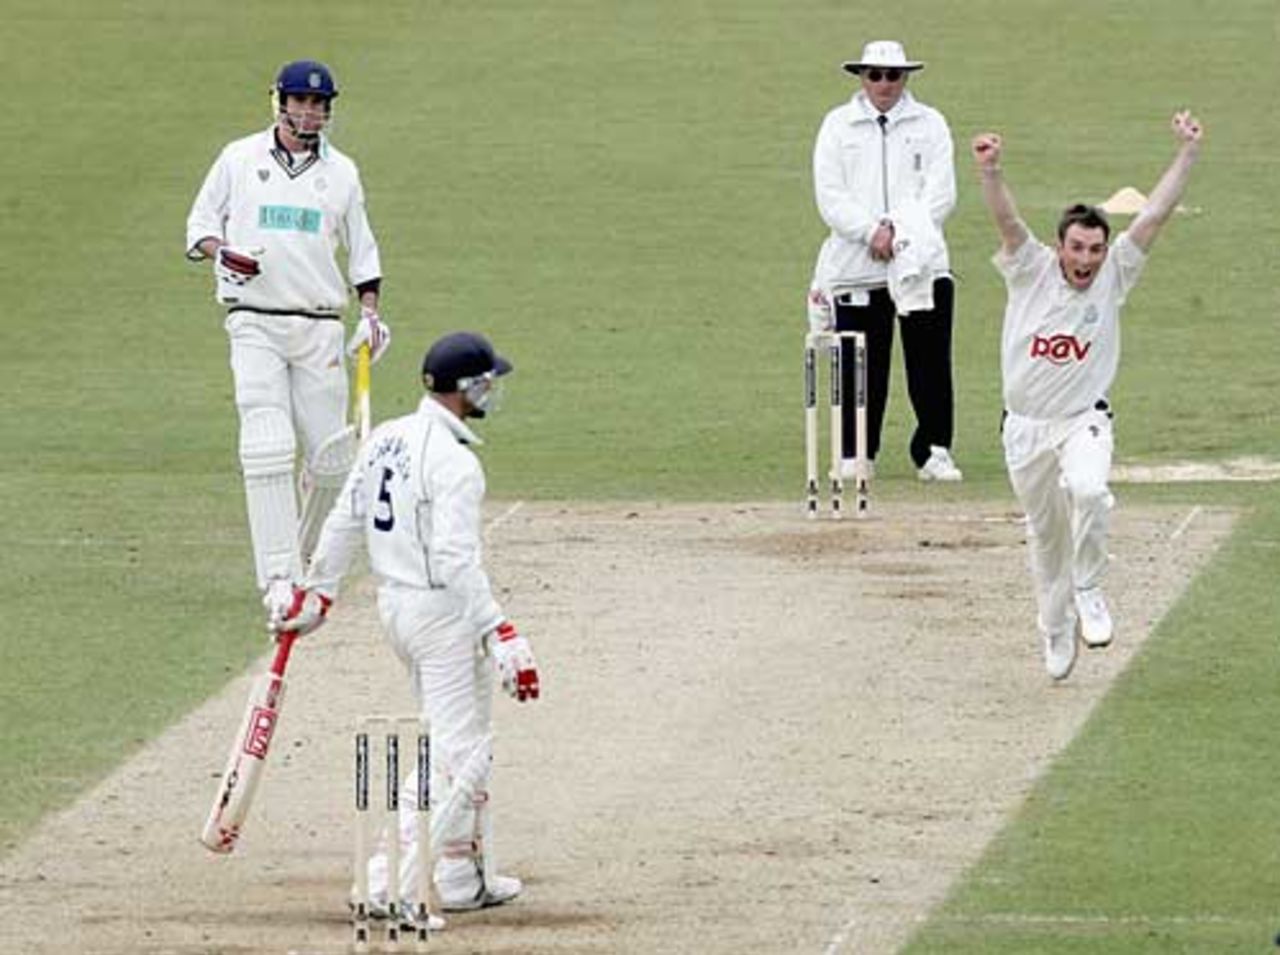 James Kirtley celebrates the wicket of John Crawley on the final of the Championship clash at Hove